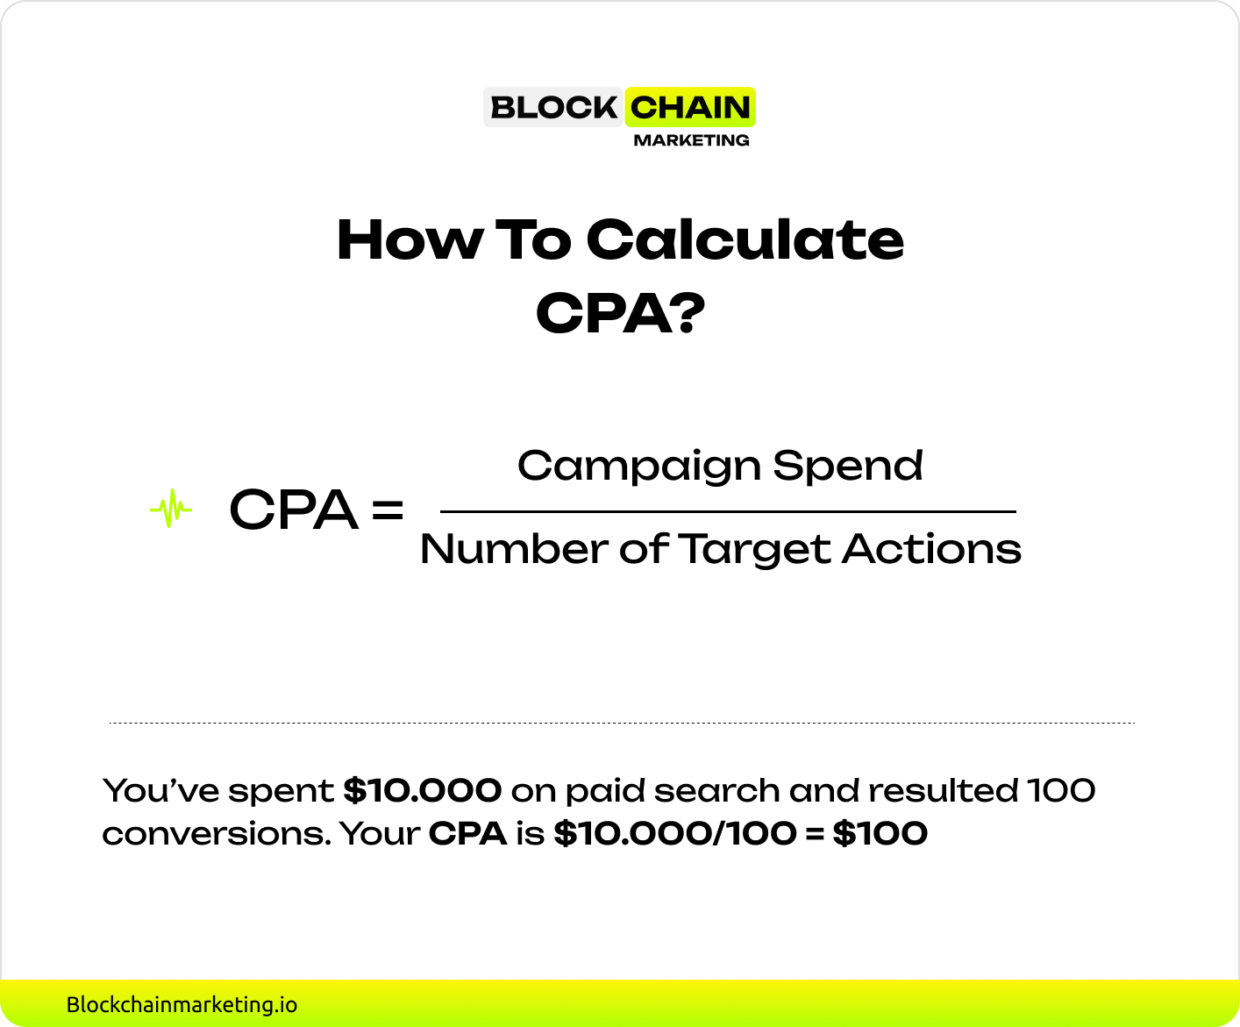 How To Calculate CPA?